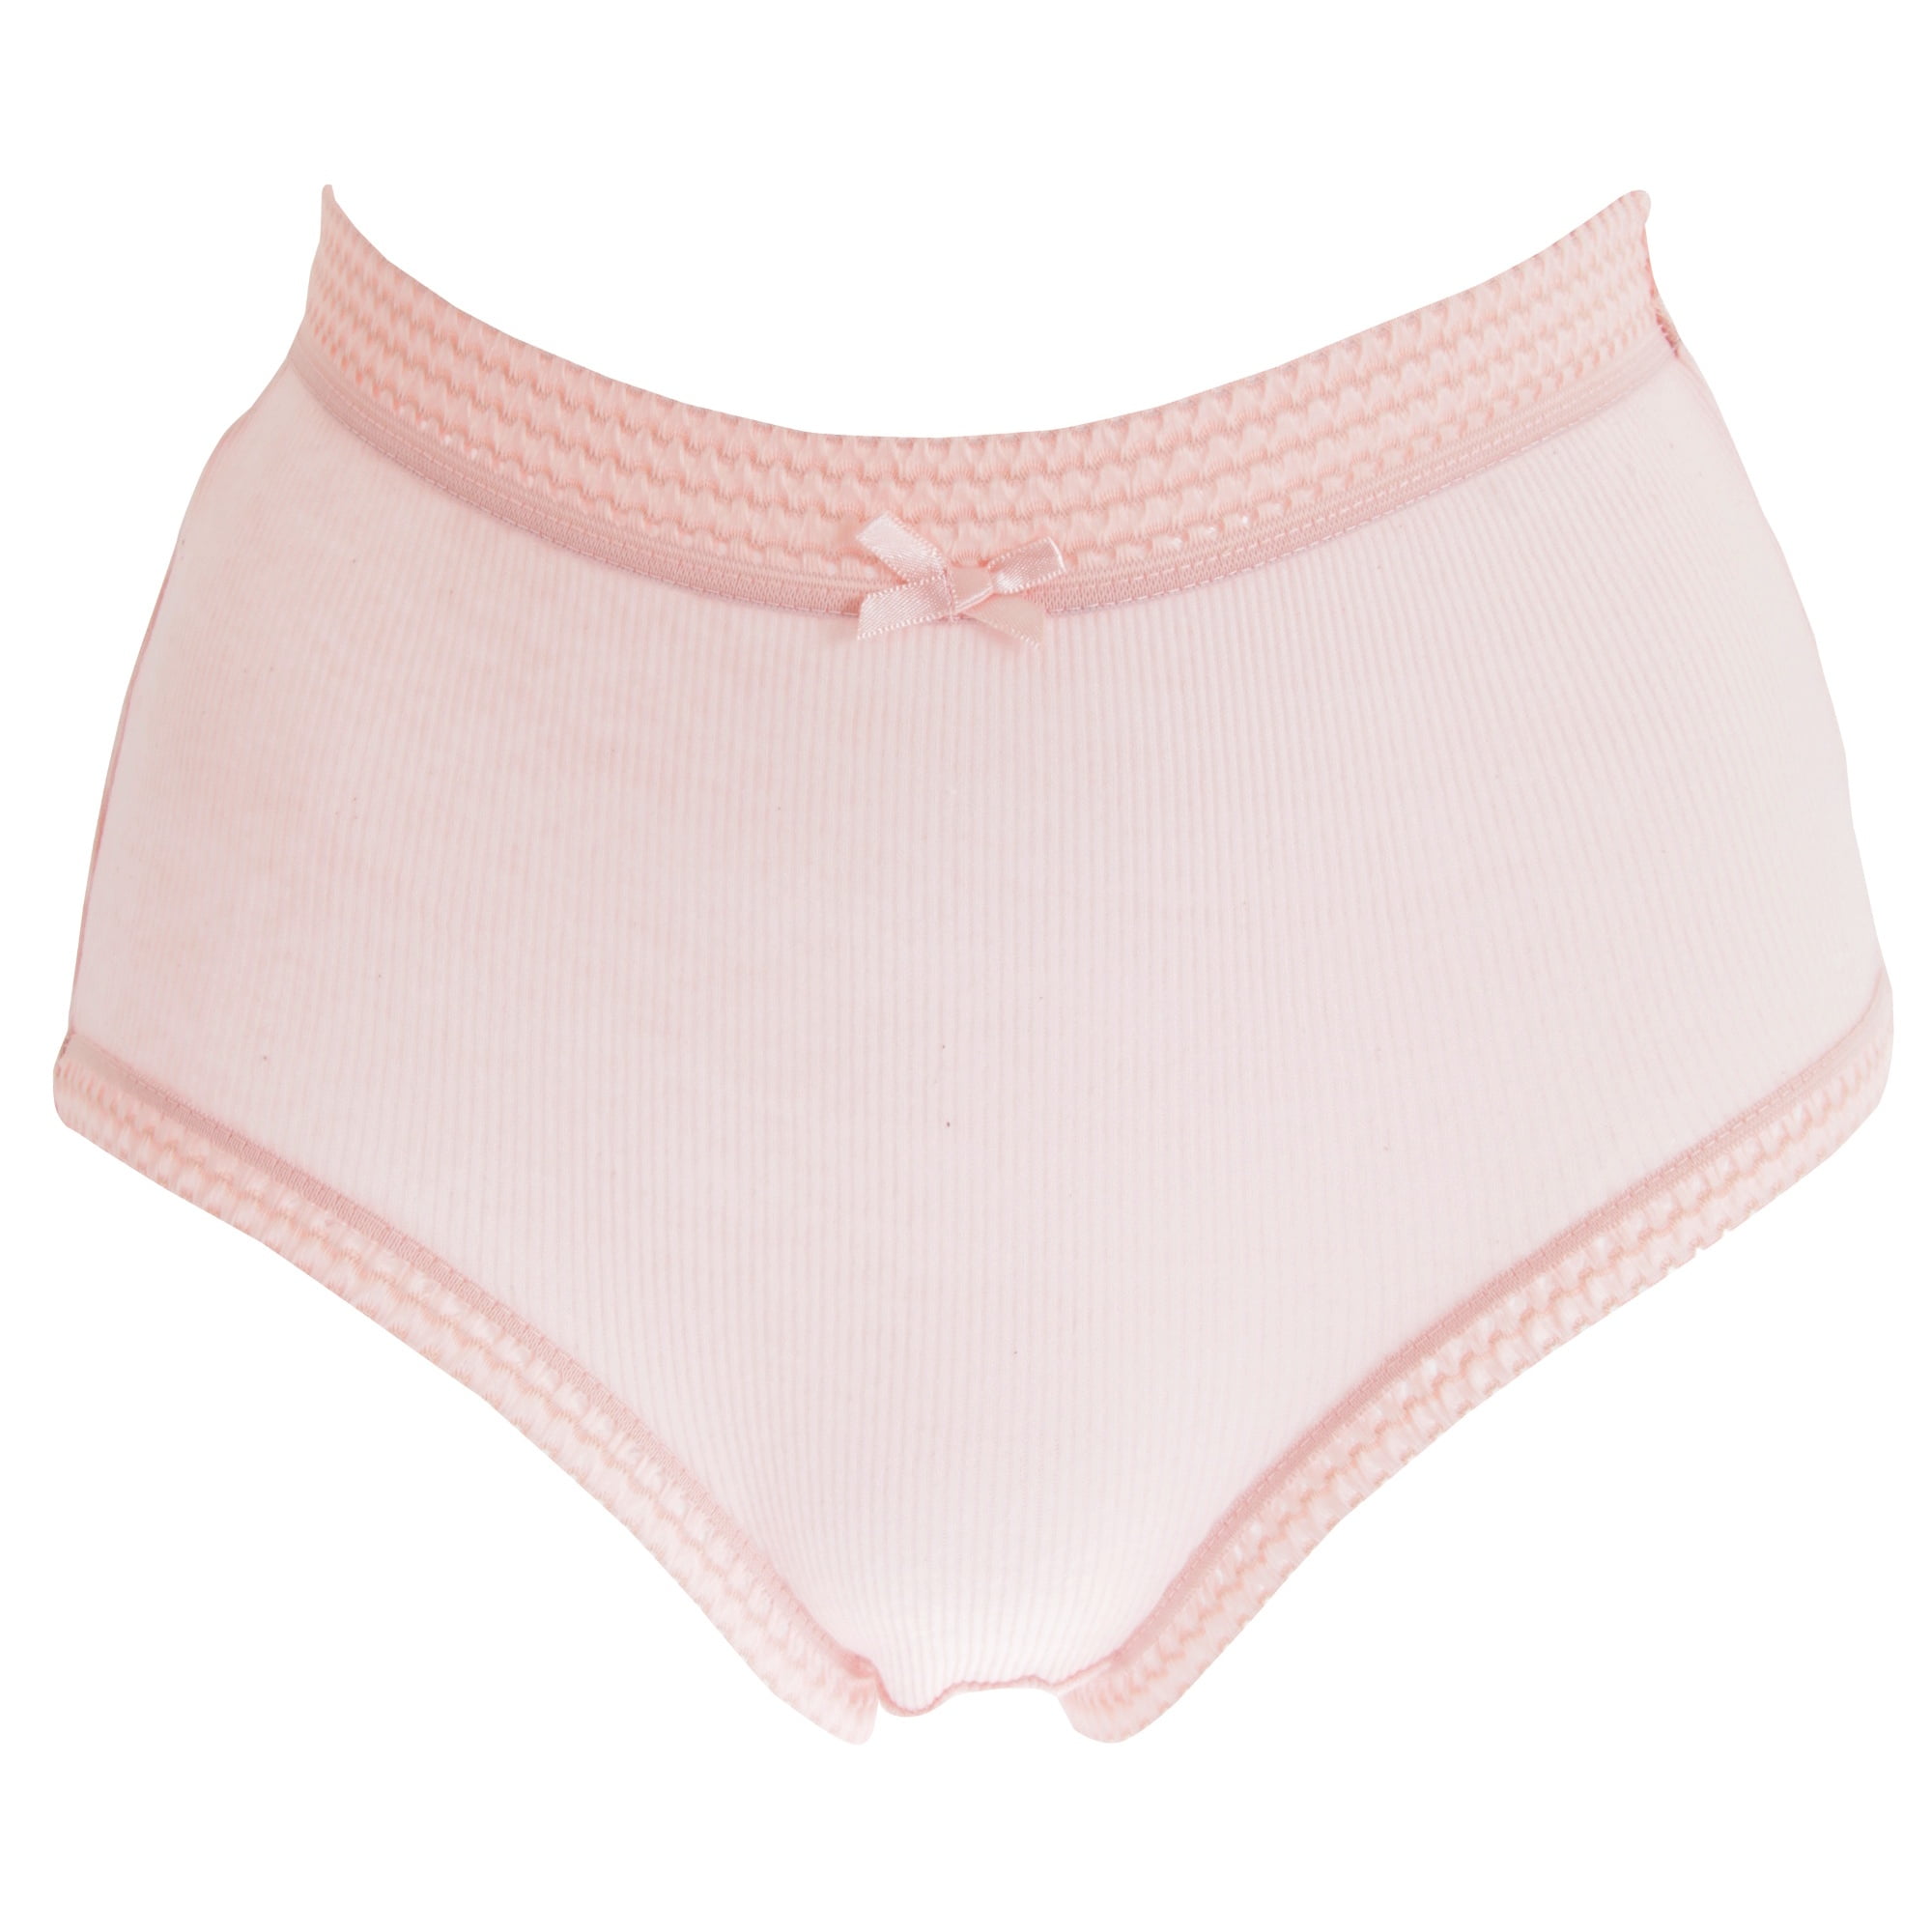 WU150 Passionelle Womens/Ladies Pastel Embroidered Cotton Briefs Pack Of 3 